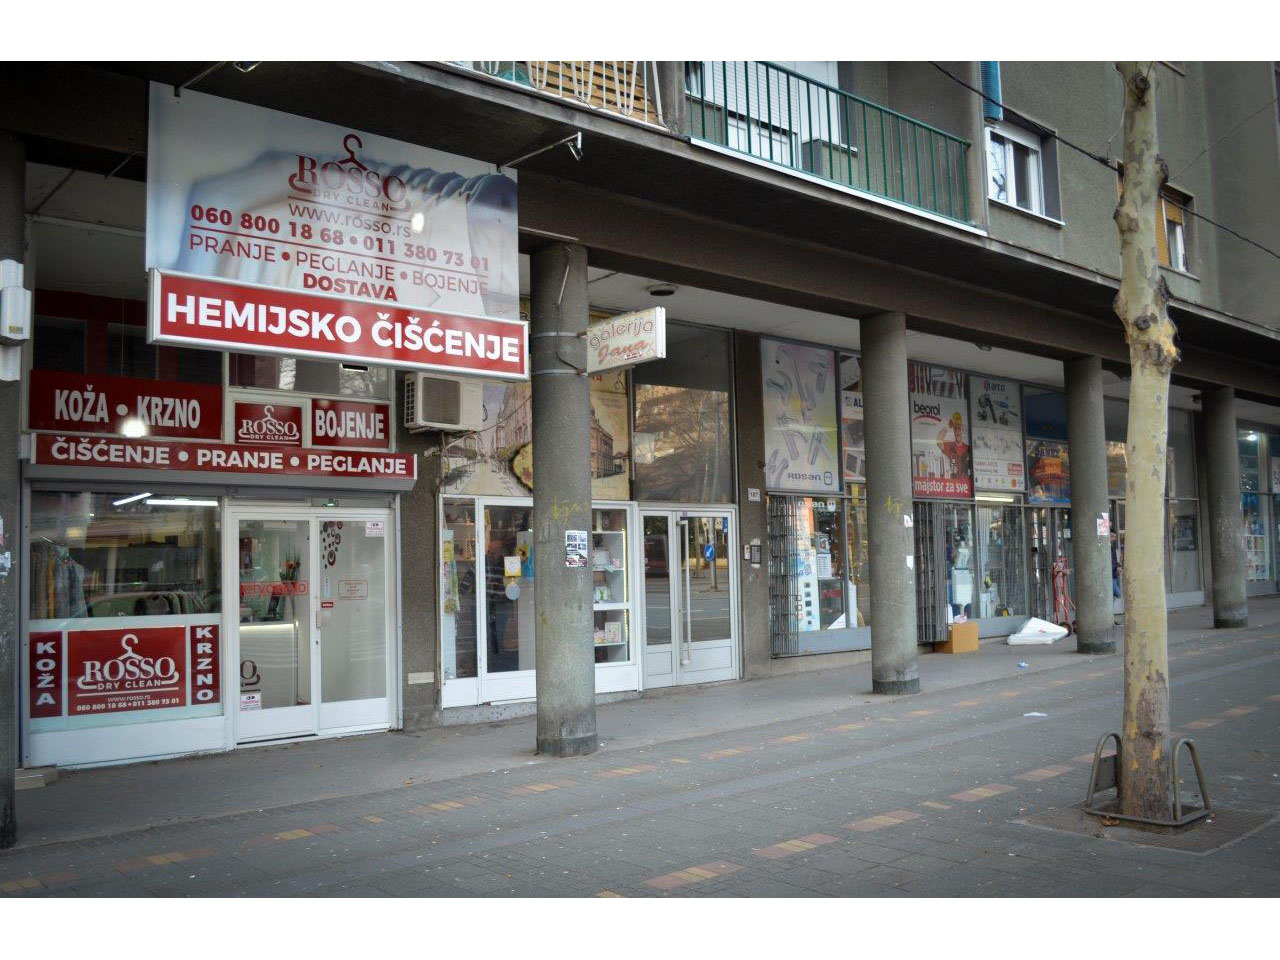 ROSSO DRY CLEANING Dry-cleaning Beograd